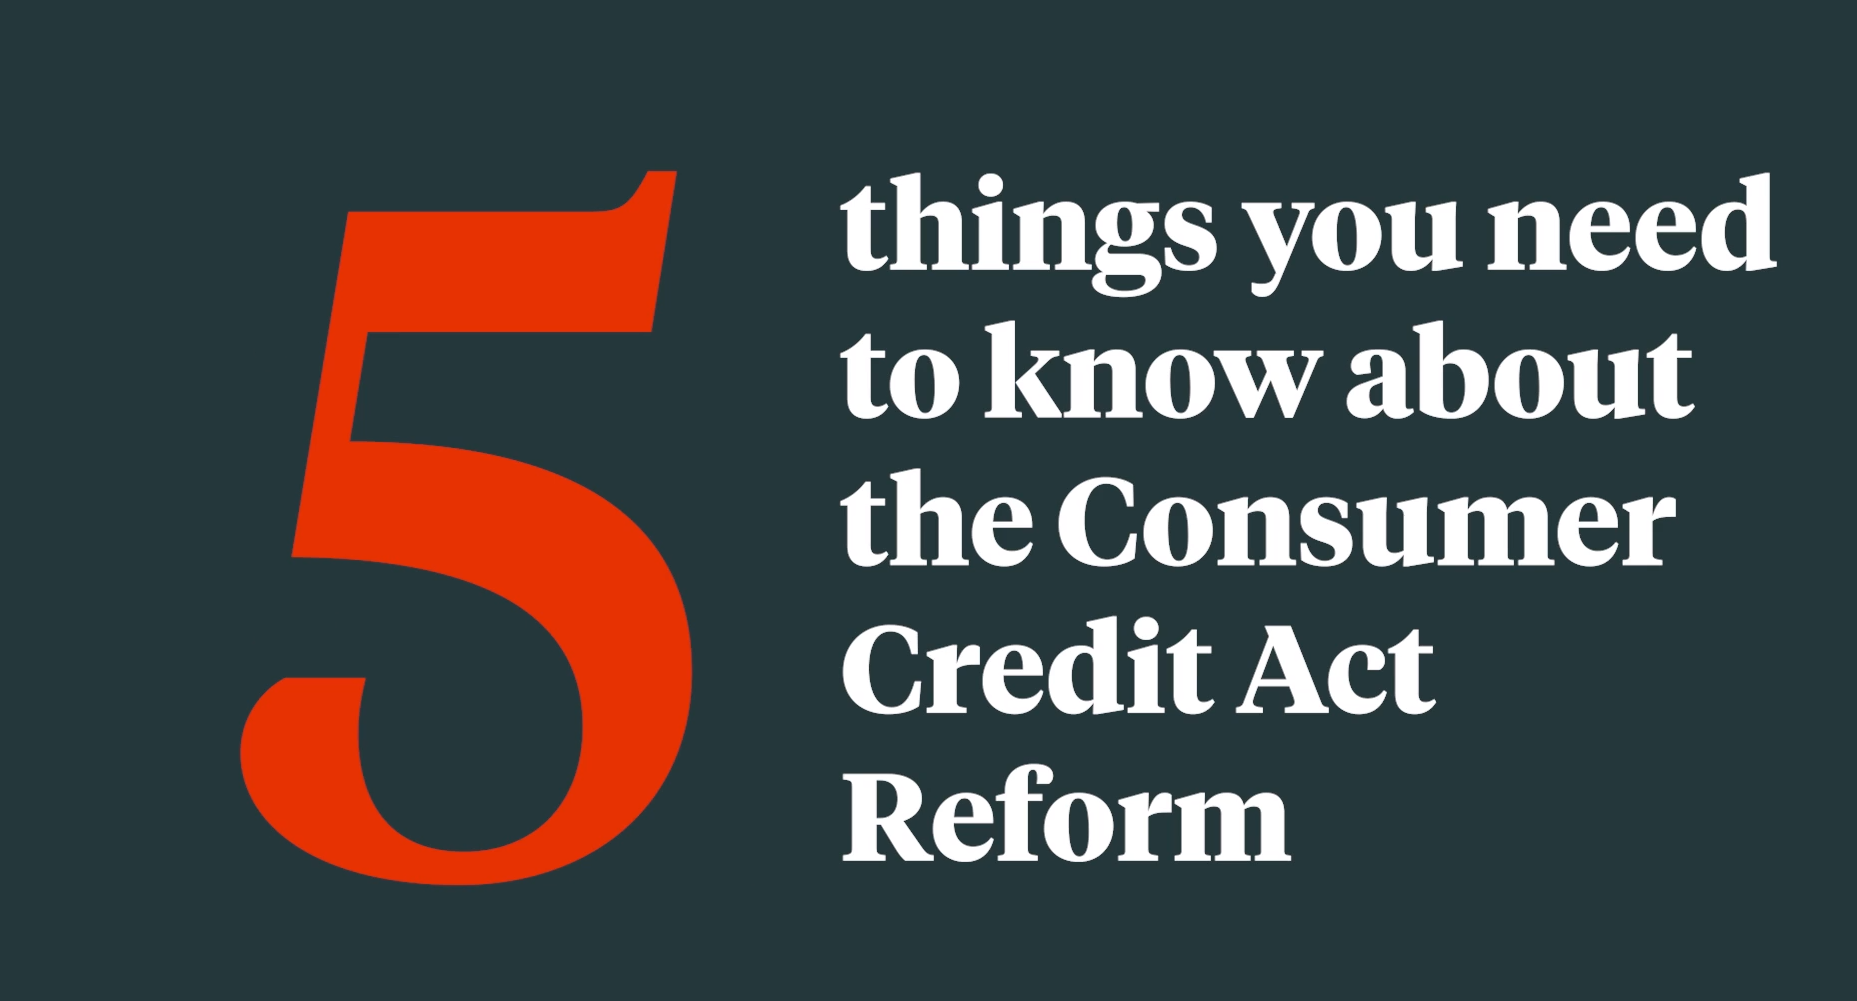 5-things-you-need-to-know-about-the-Consumer-Credit-Act-Reform